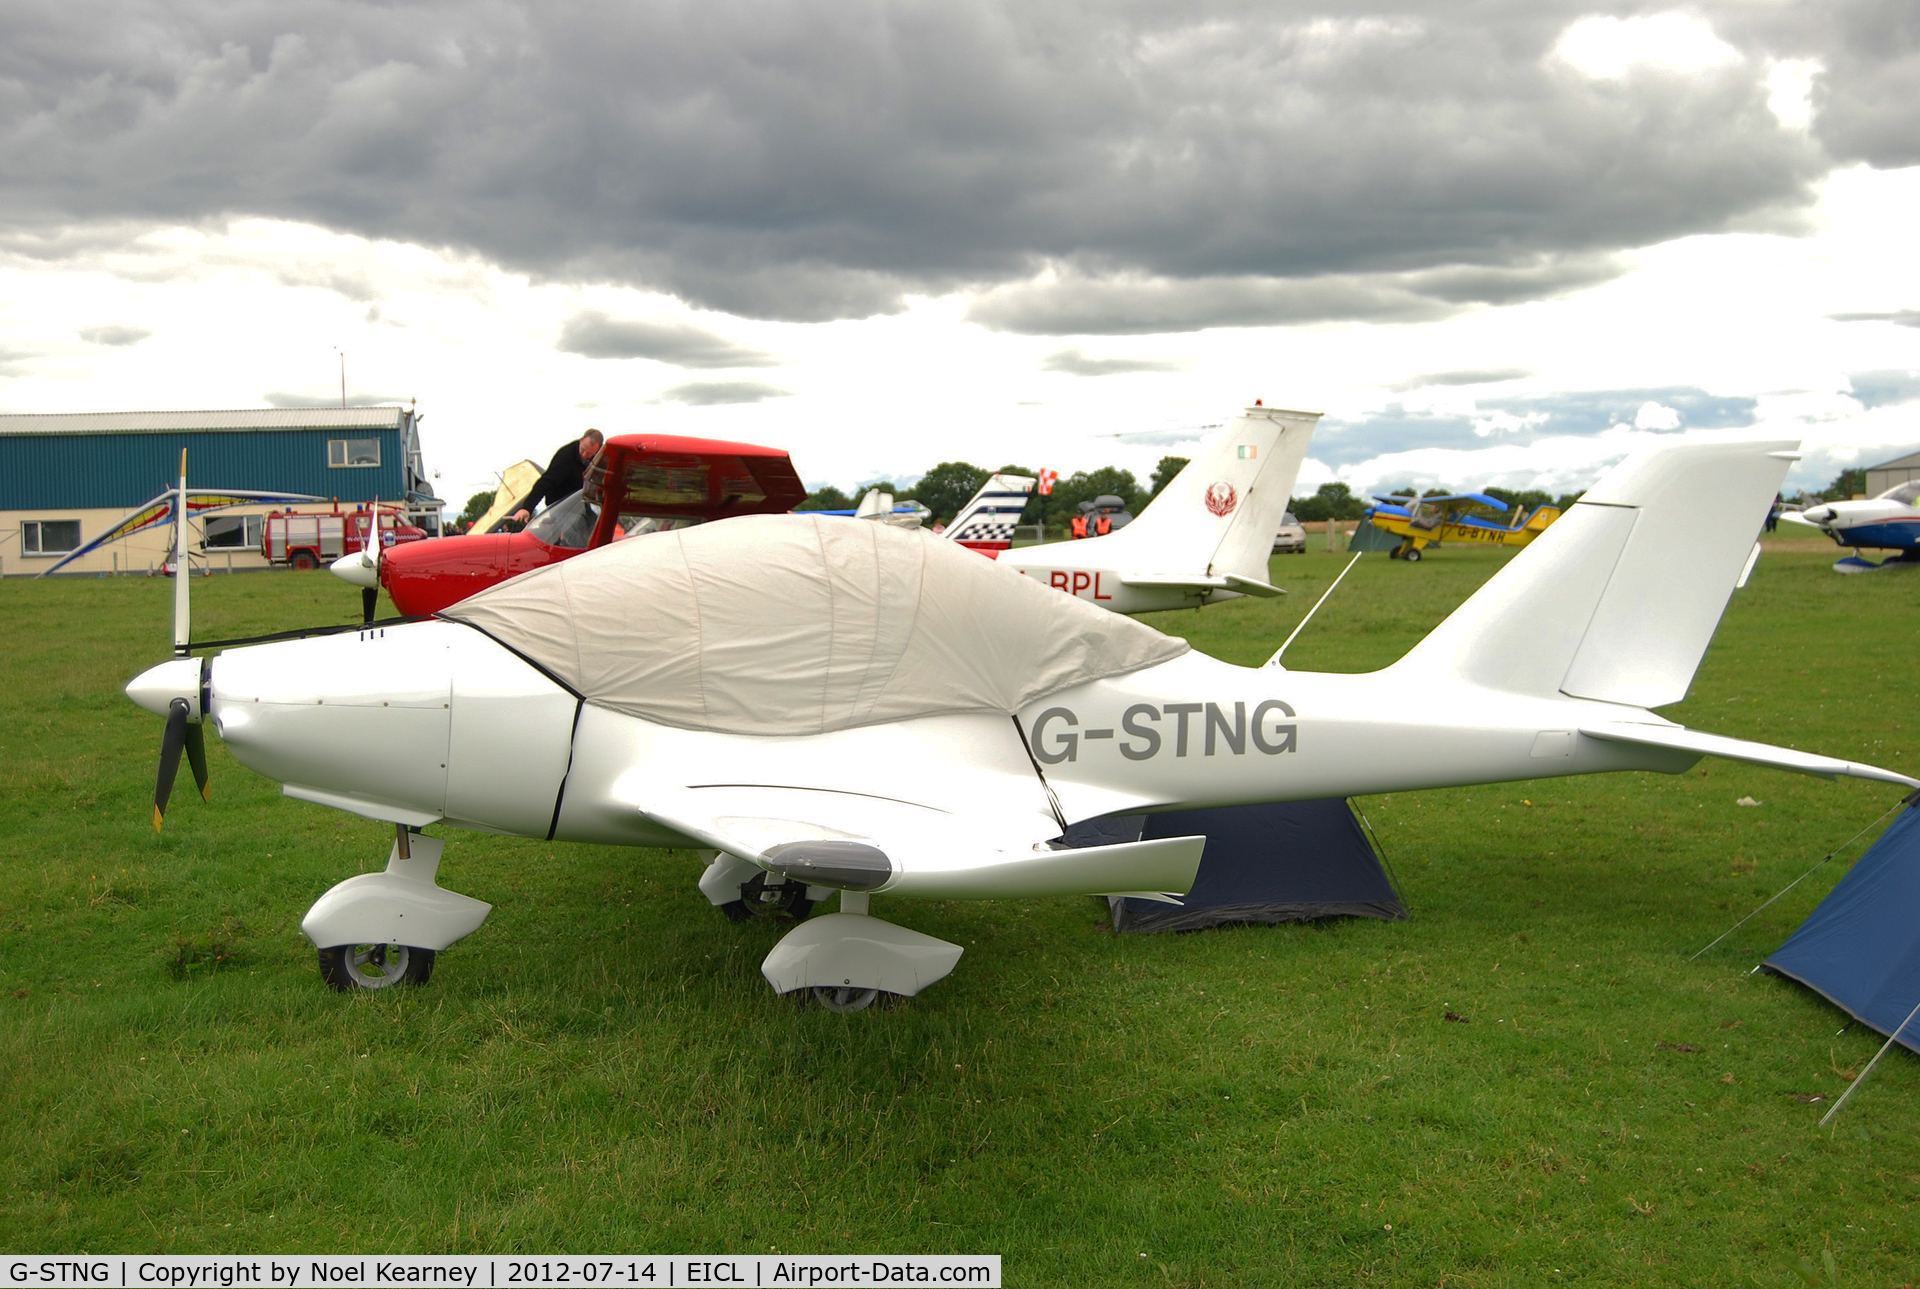 G-STNG, 2011 TL Ultralight TL-2000UK Sting Carbon C/N LAA 347-14789, On display at the Clonbullogue Fly-in July 2012